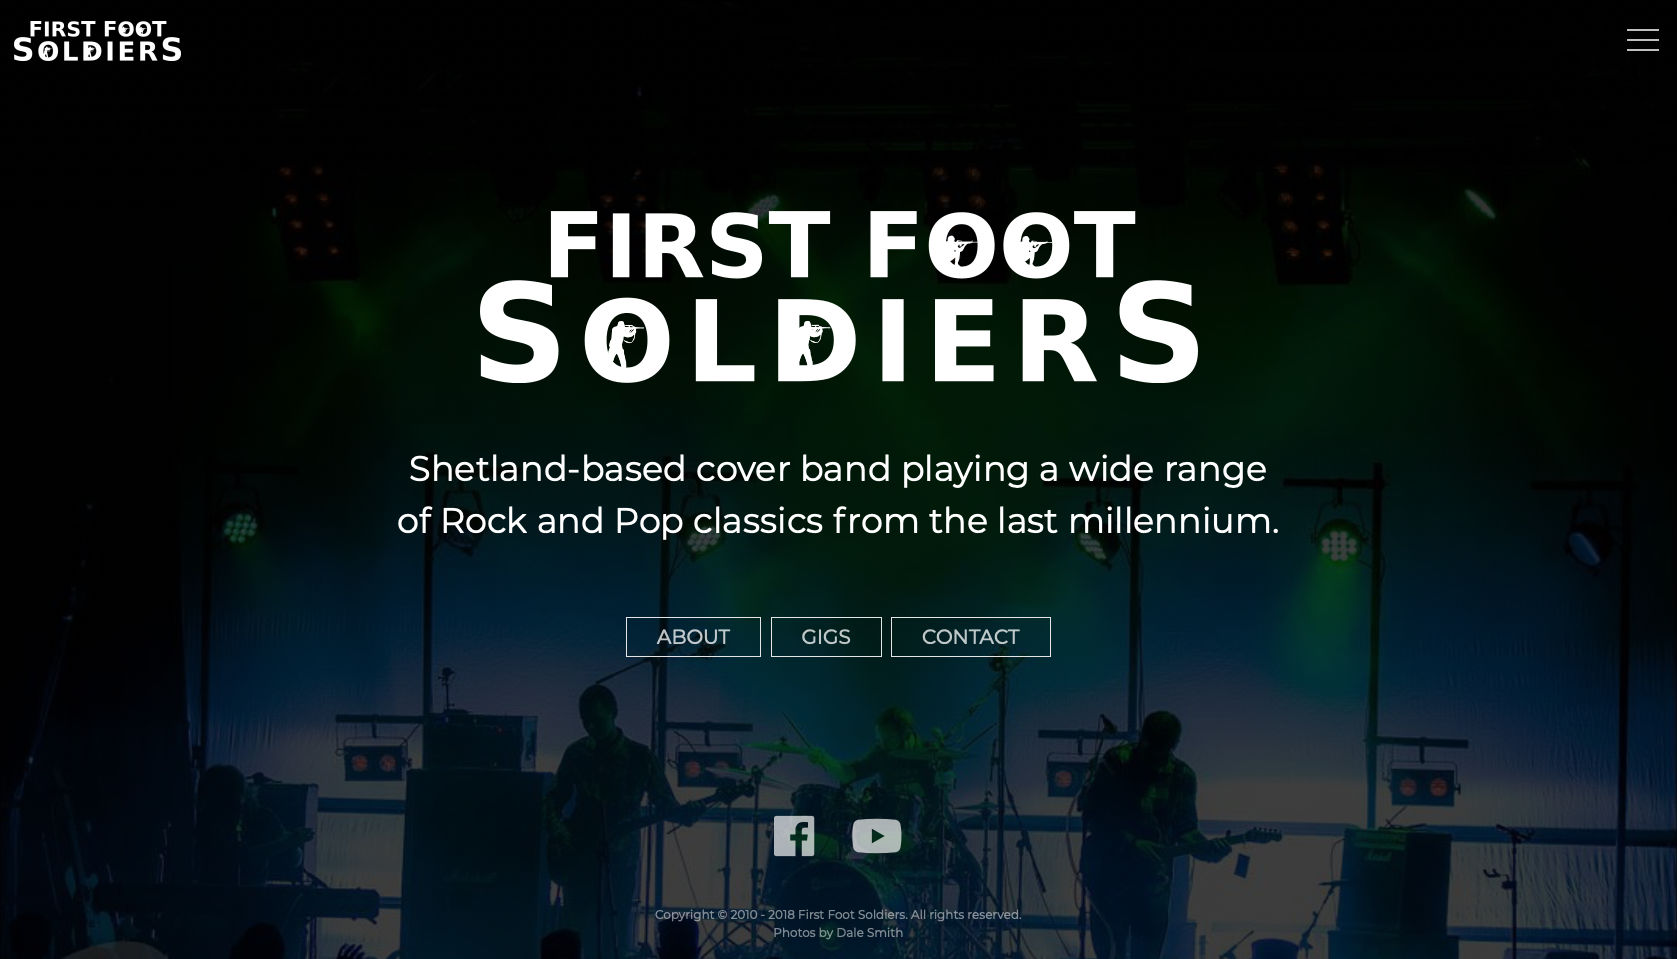 First Foot Soldiers - Visit the Website